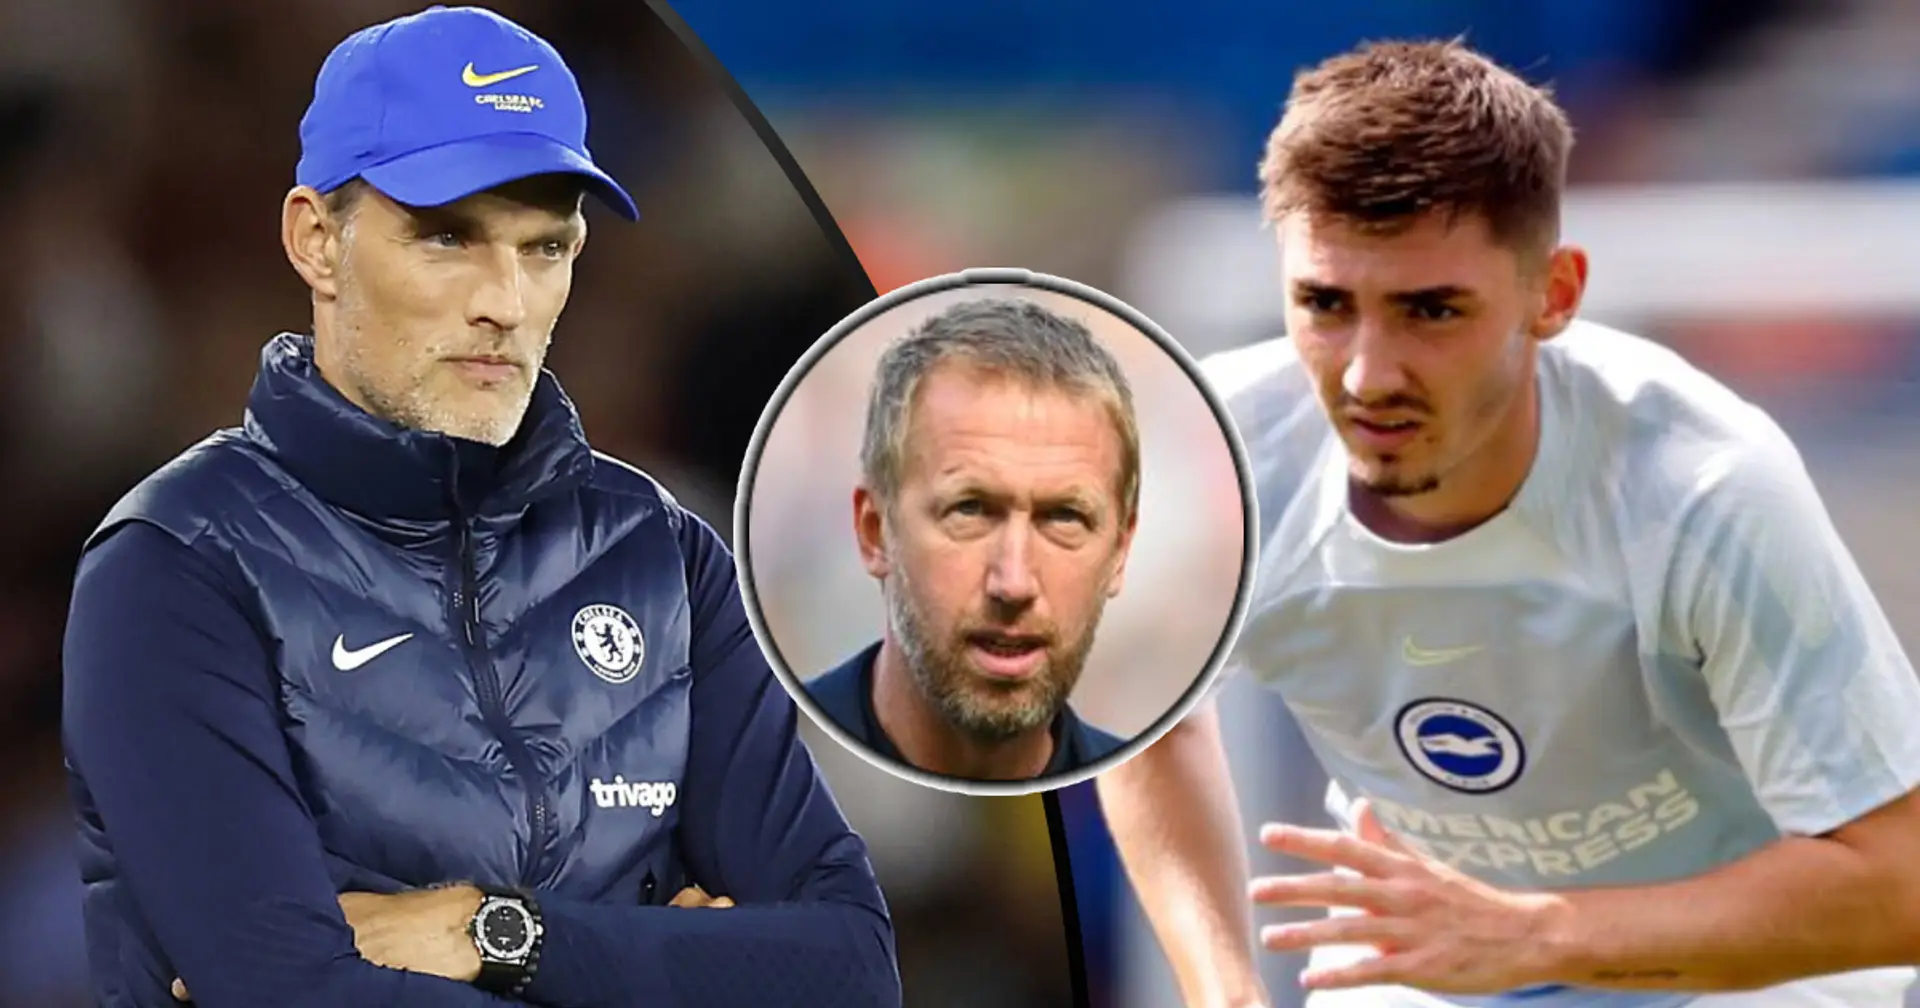 Chelsea wanted to keep Gilmour but Tuchel advised him to join Brighton to play under Potter (reliability: 5 stars)